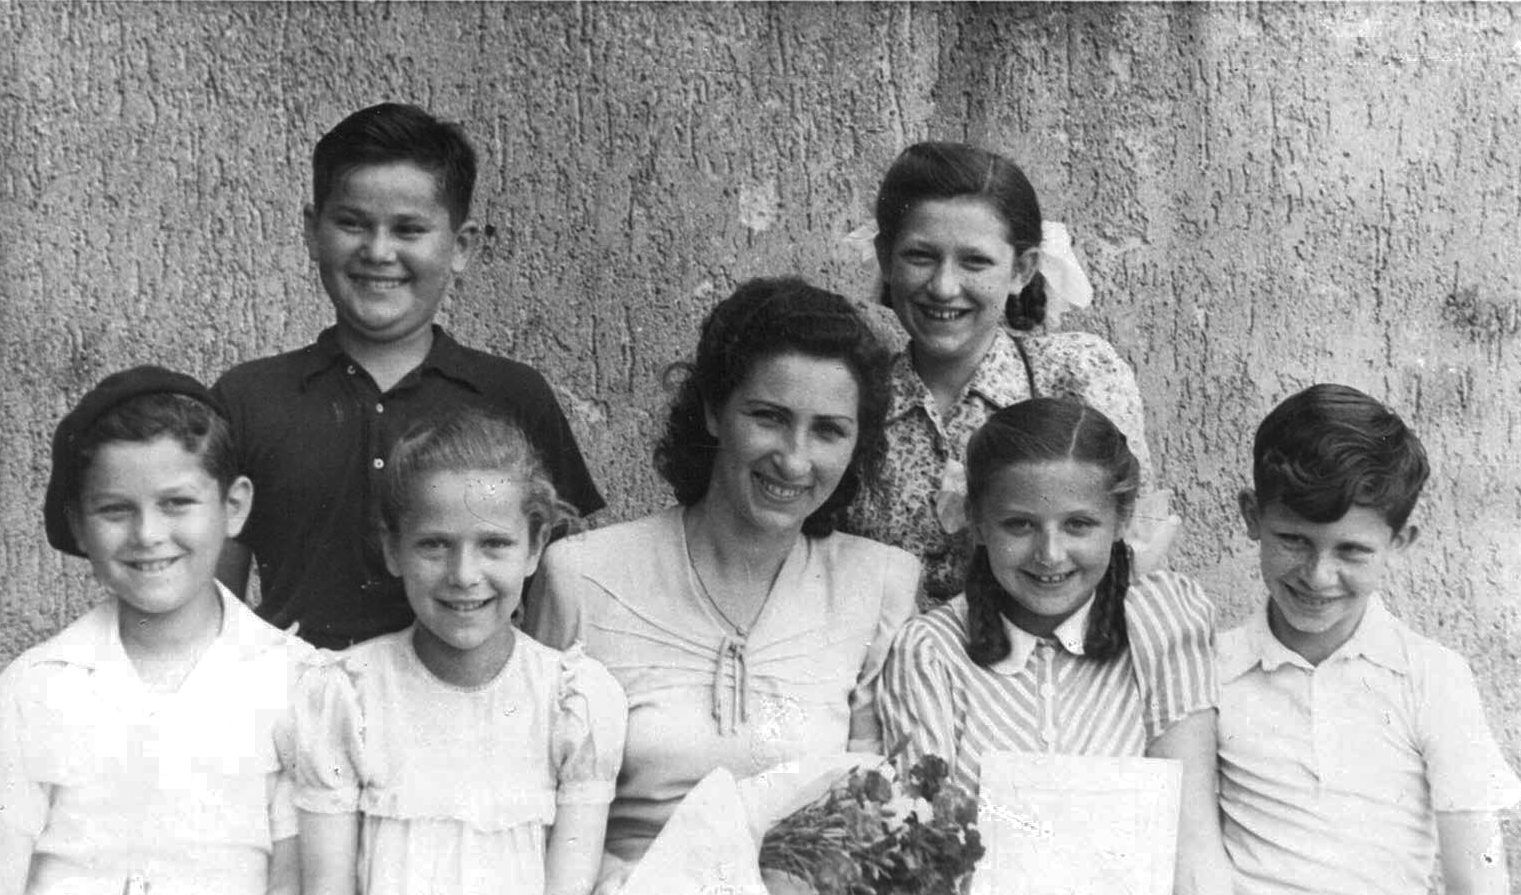 Tola with her classmates at Landsberg am Lech Displaced Persons camp, Germany 1950